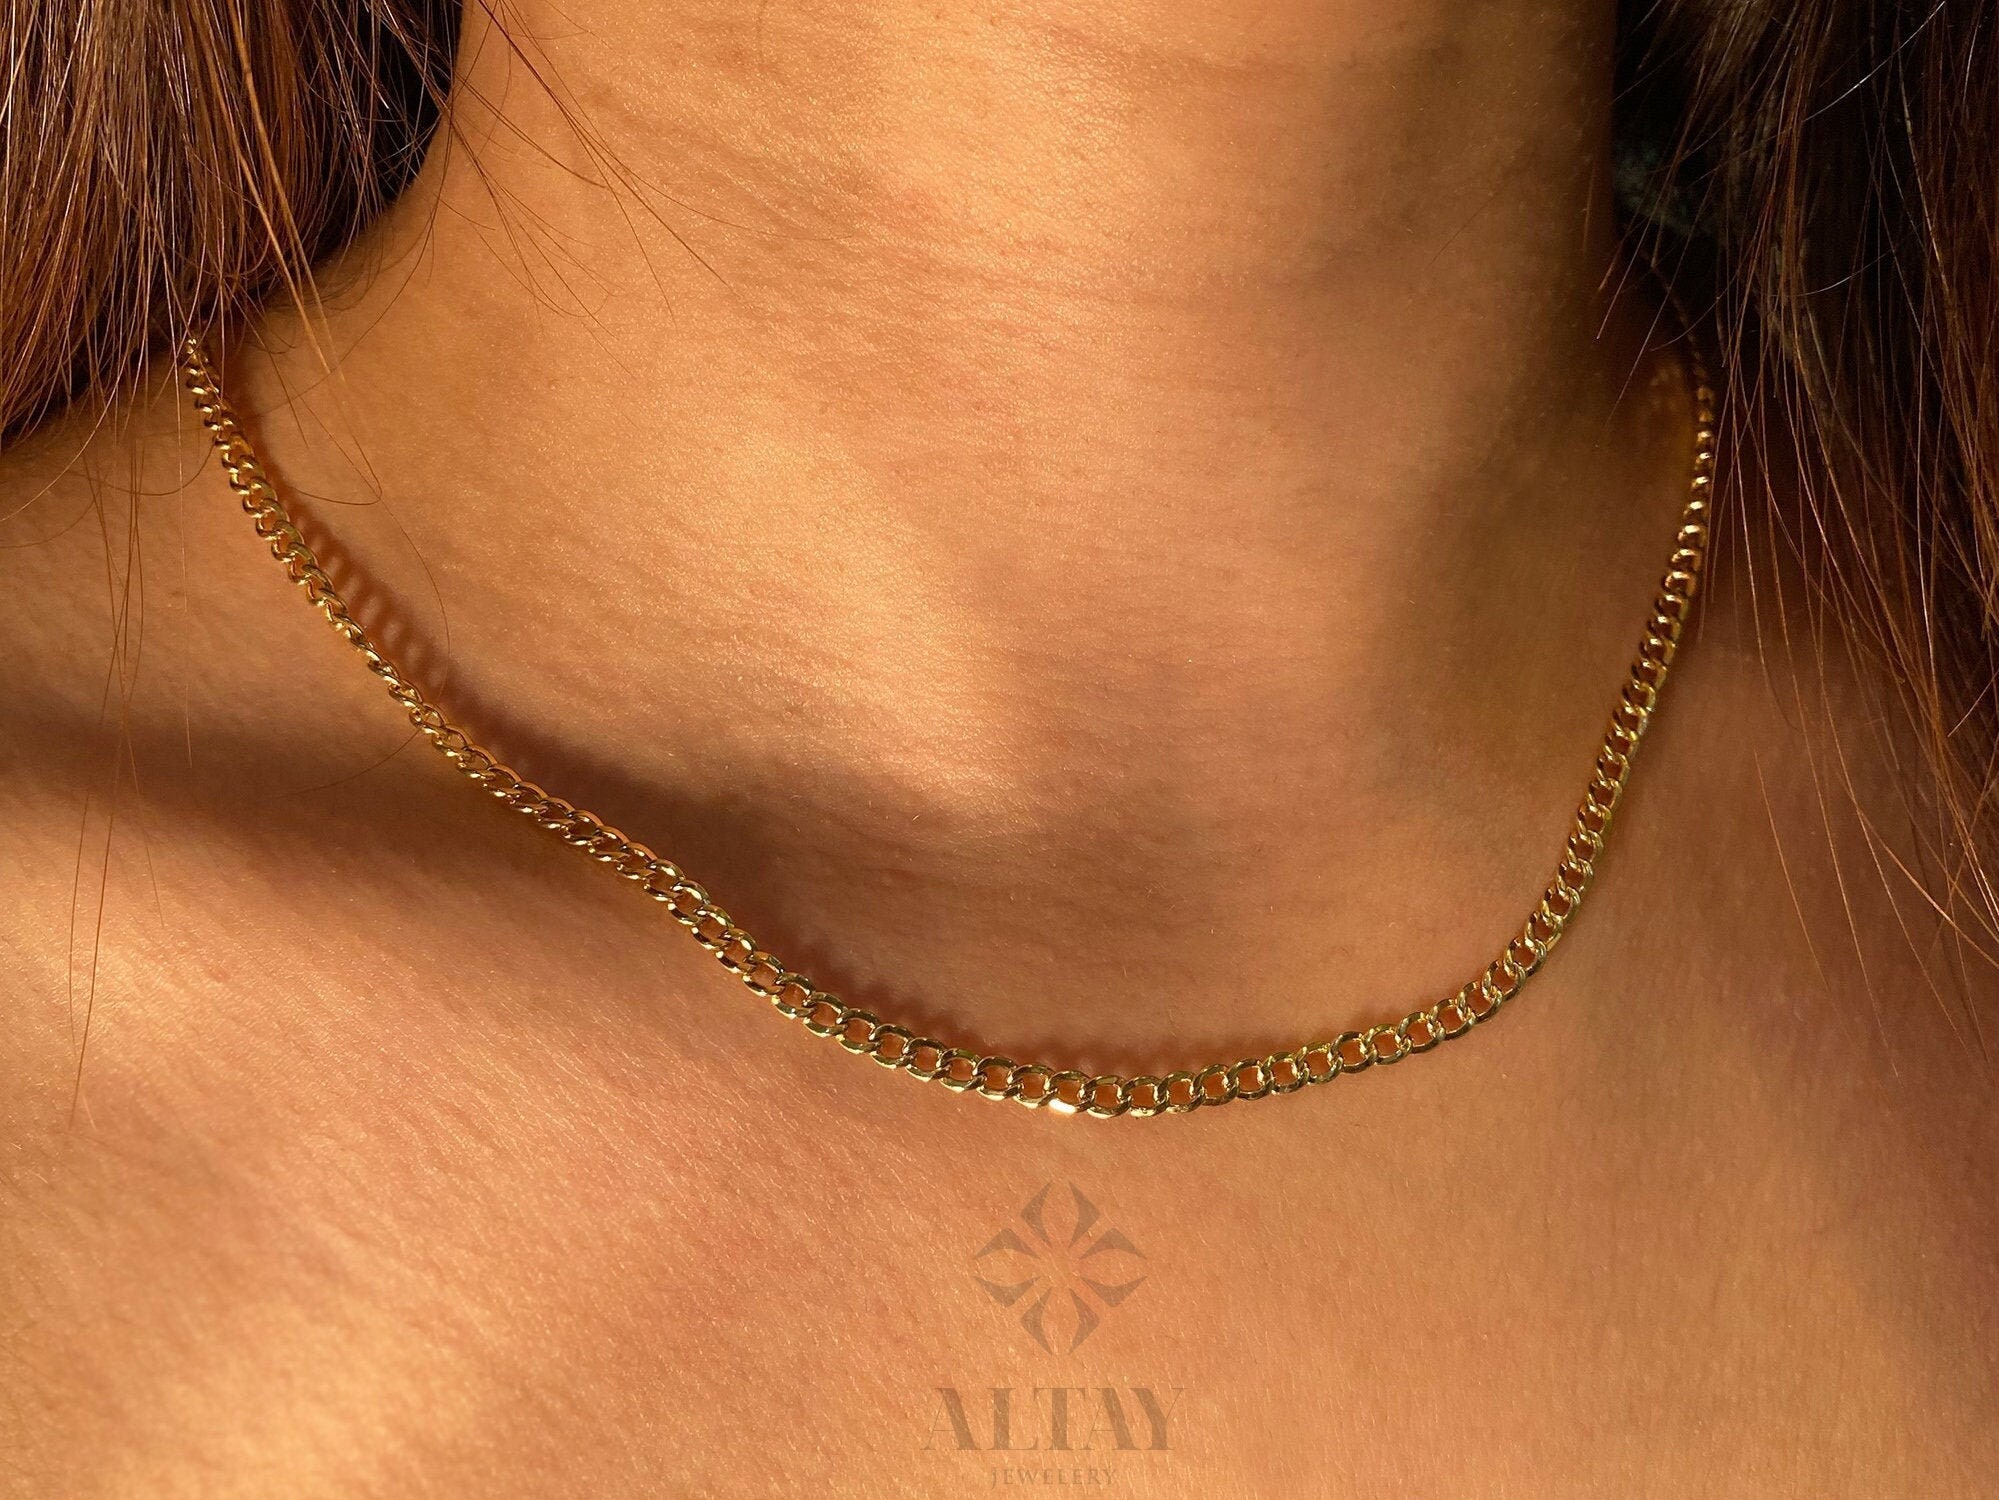 Mejuri 14K Yellow Gold Chain Necklaces: Curb Chain Necklace